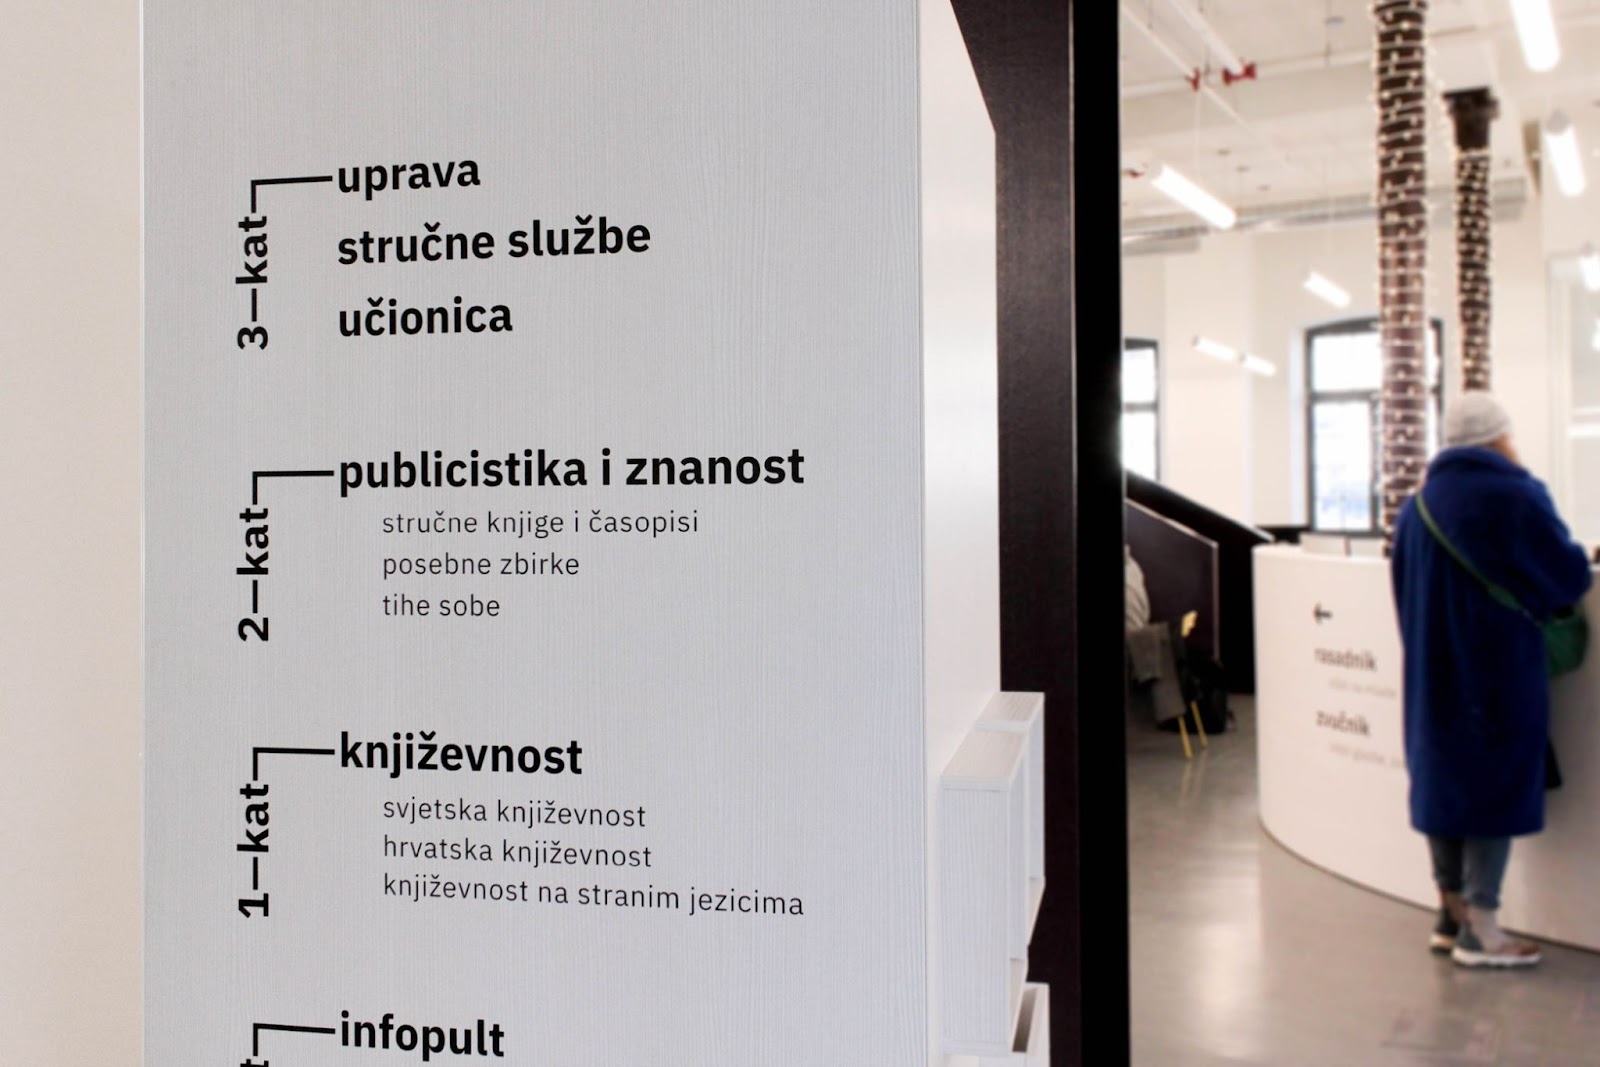 Artifact from the Branding & Visual Identity Redefined at Rijeka Library article on Abduzeedo